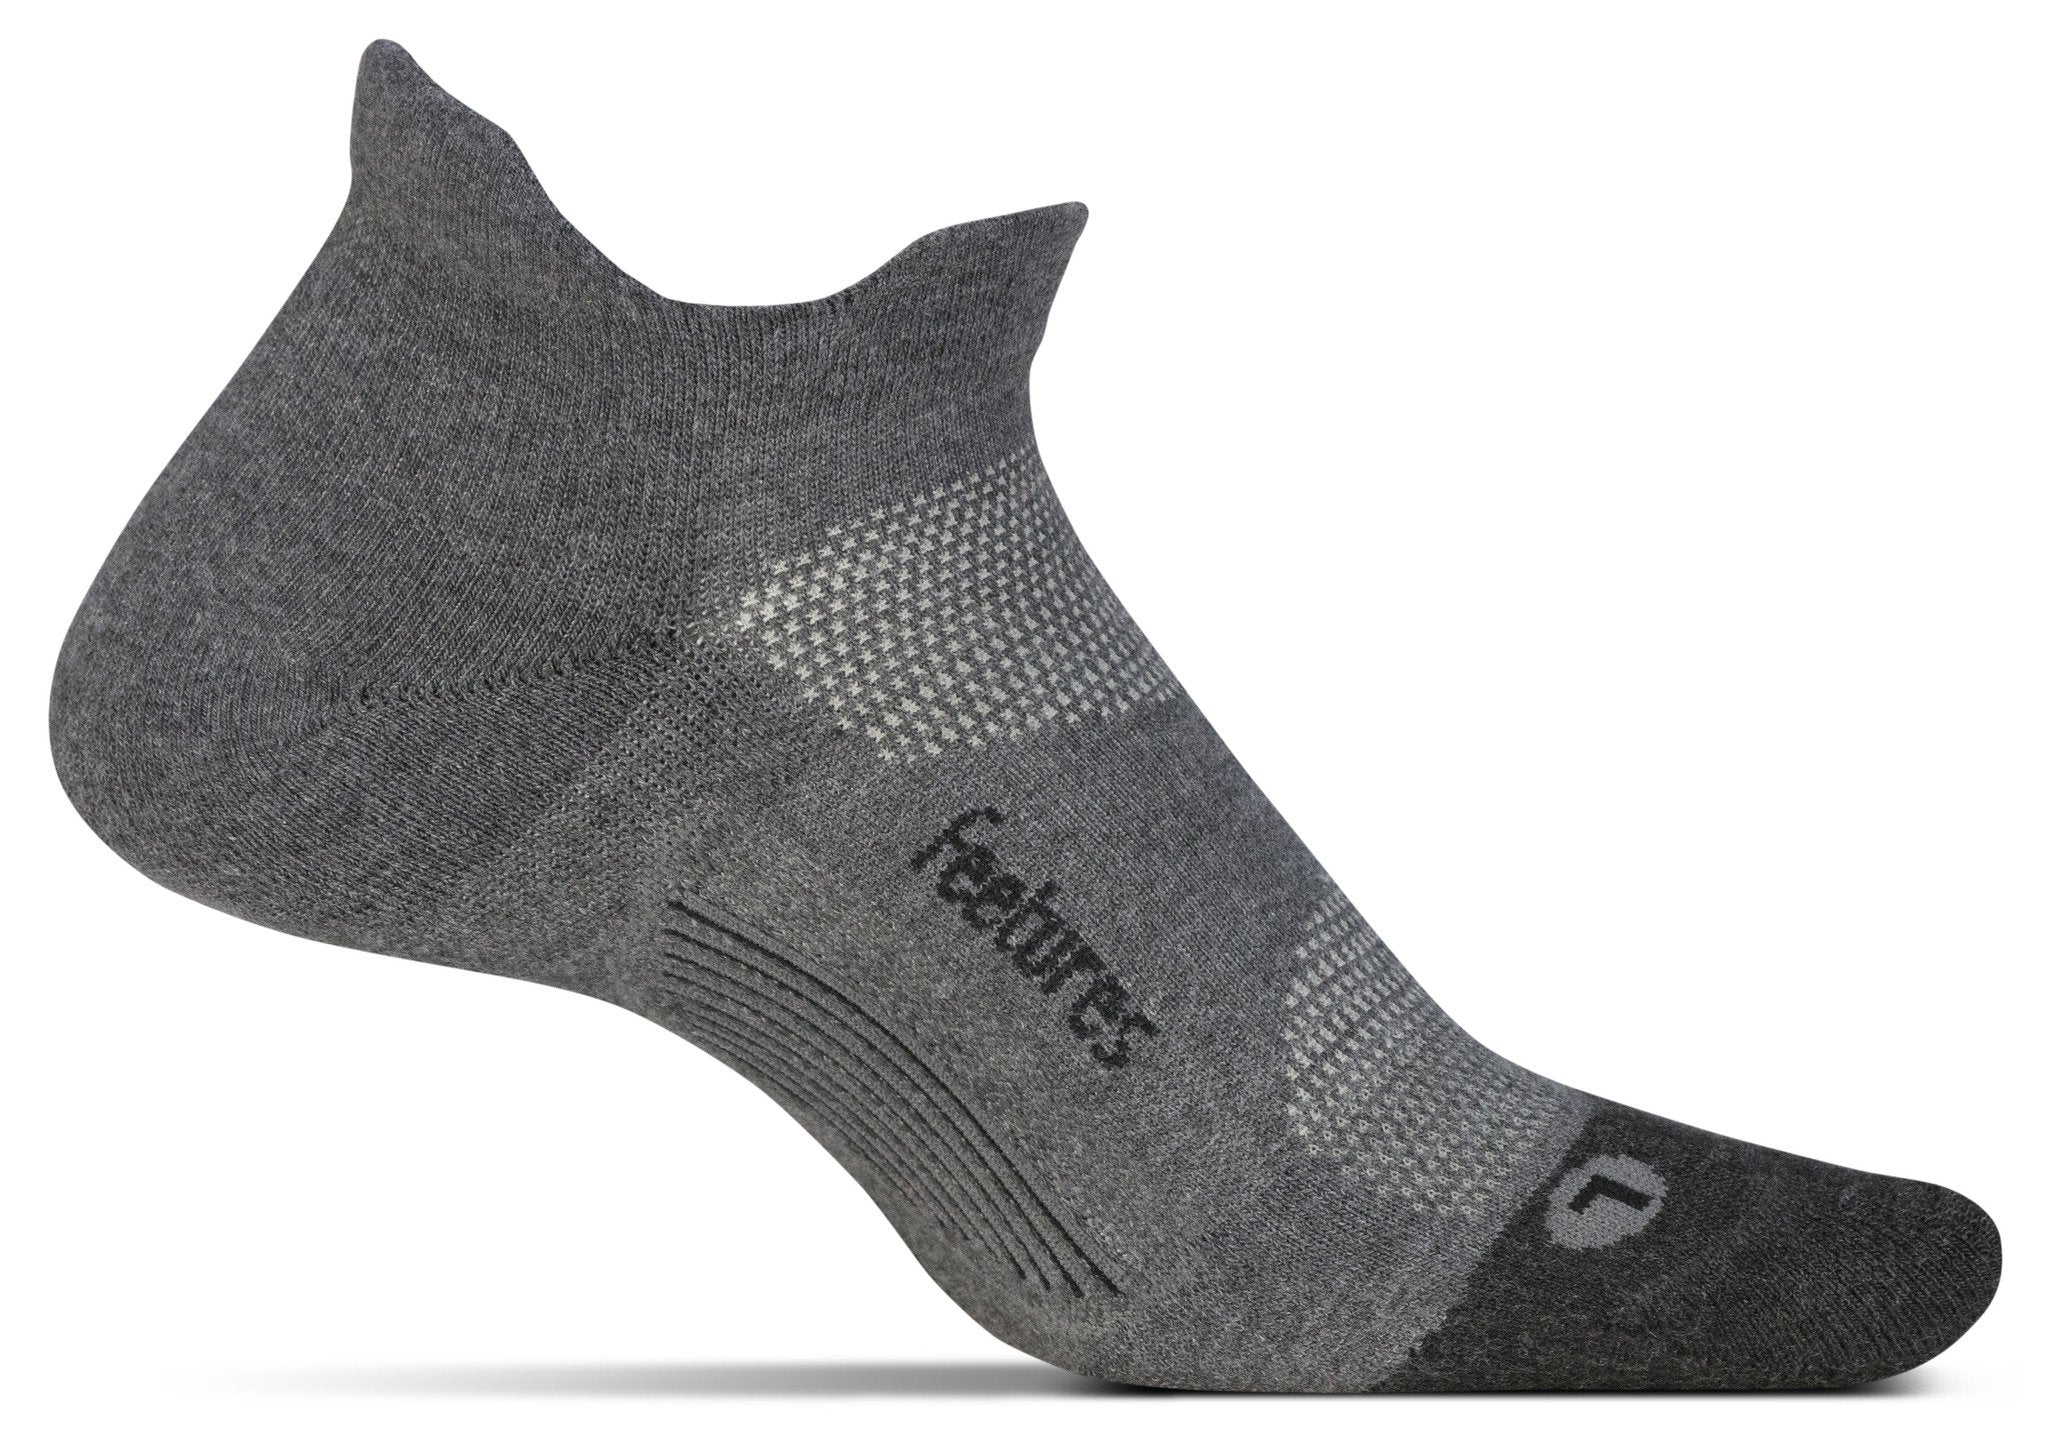 A medial view of the Feetures Elite Max Cushion running sock (left foot) in the color grey.